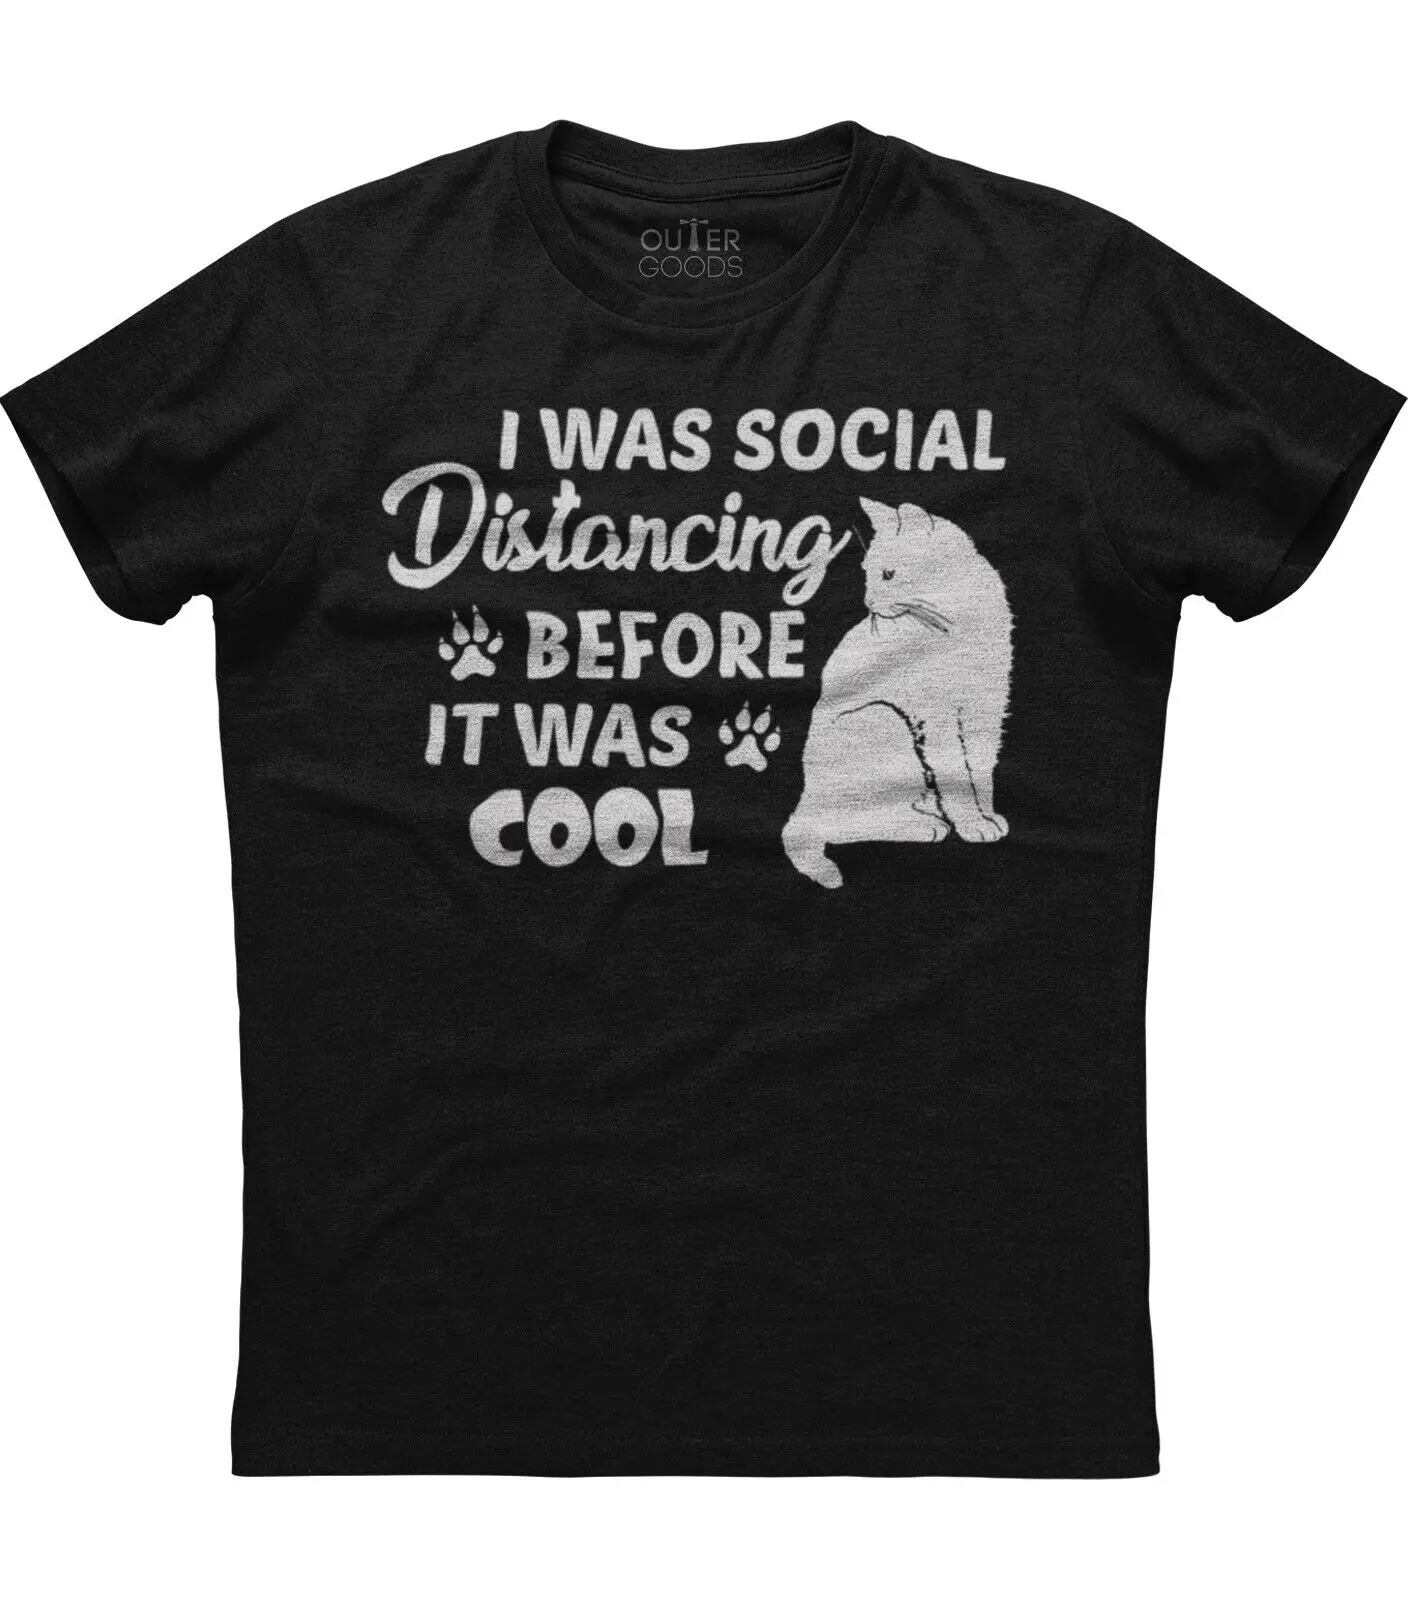 

I Was Social Distancing Before It Was Cool. Funny Phrase T-Shirt. Summer Cotton O-Neck Short Sleeve Mens T Shirt New S-3XL